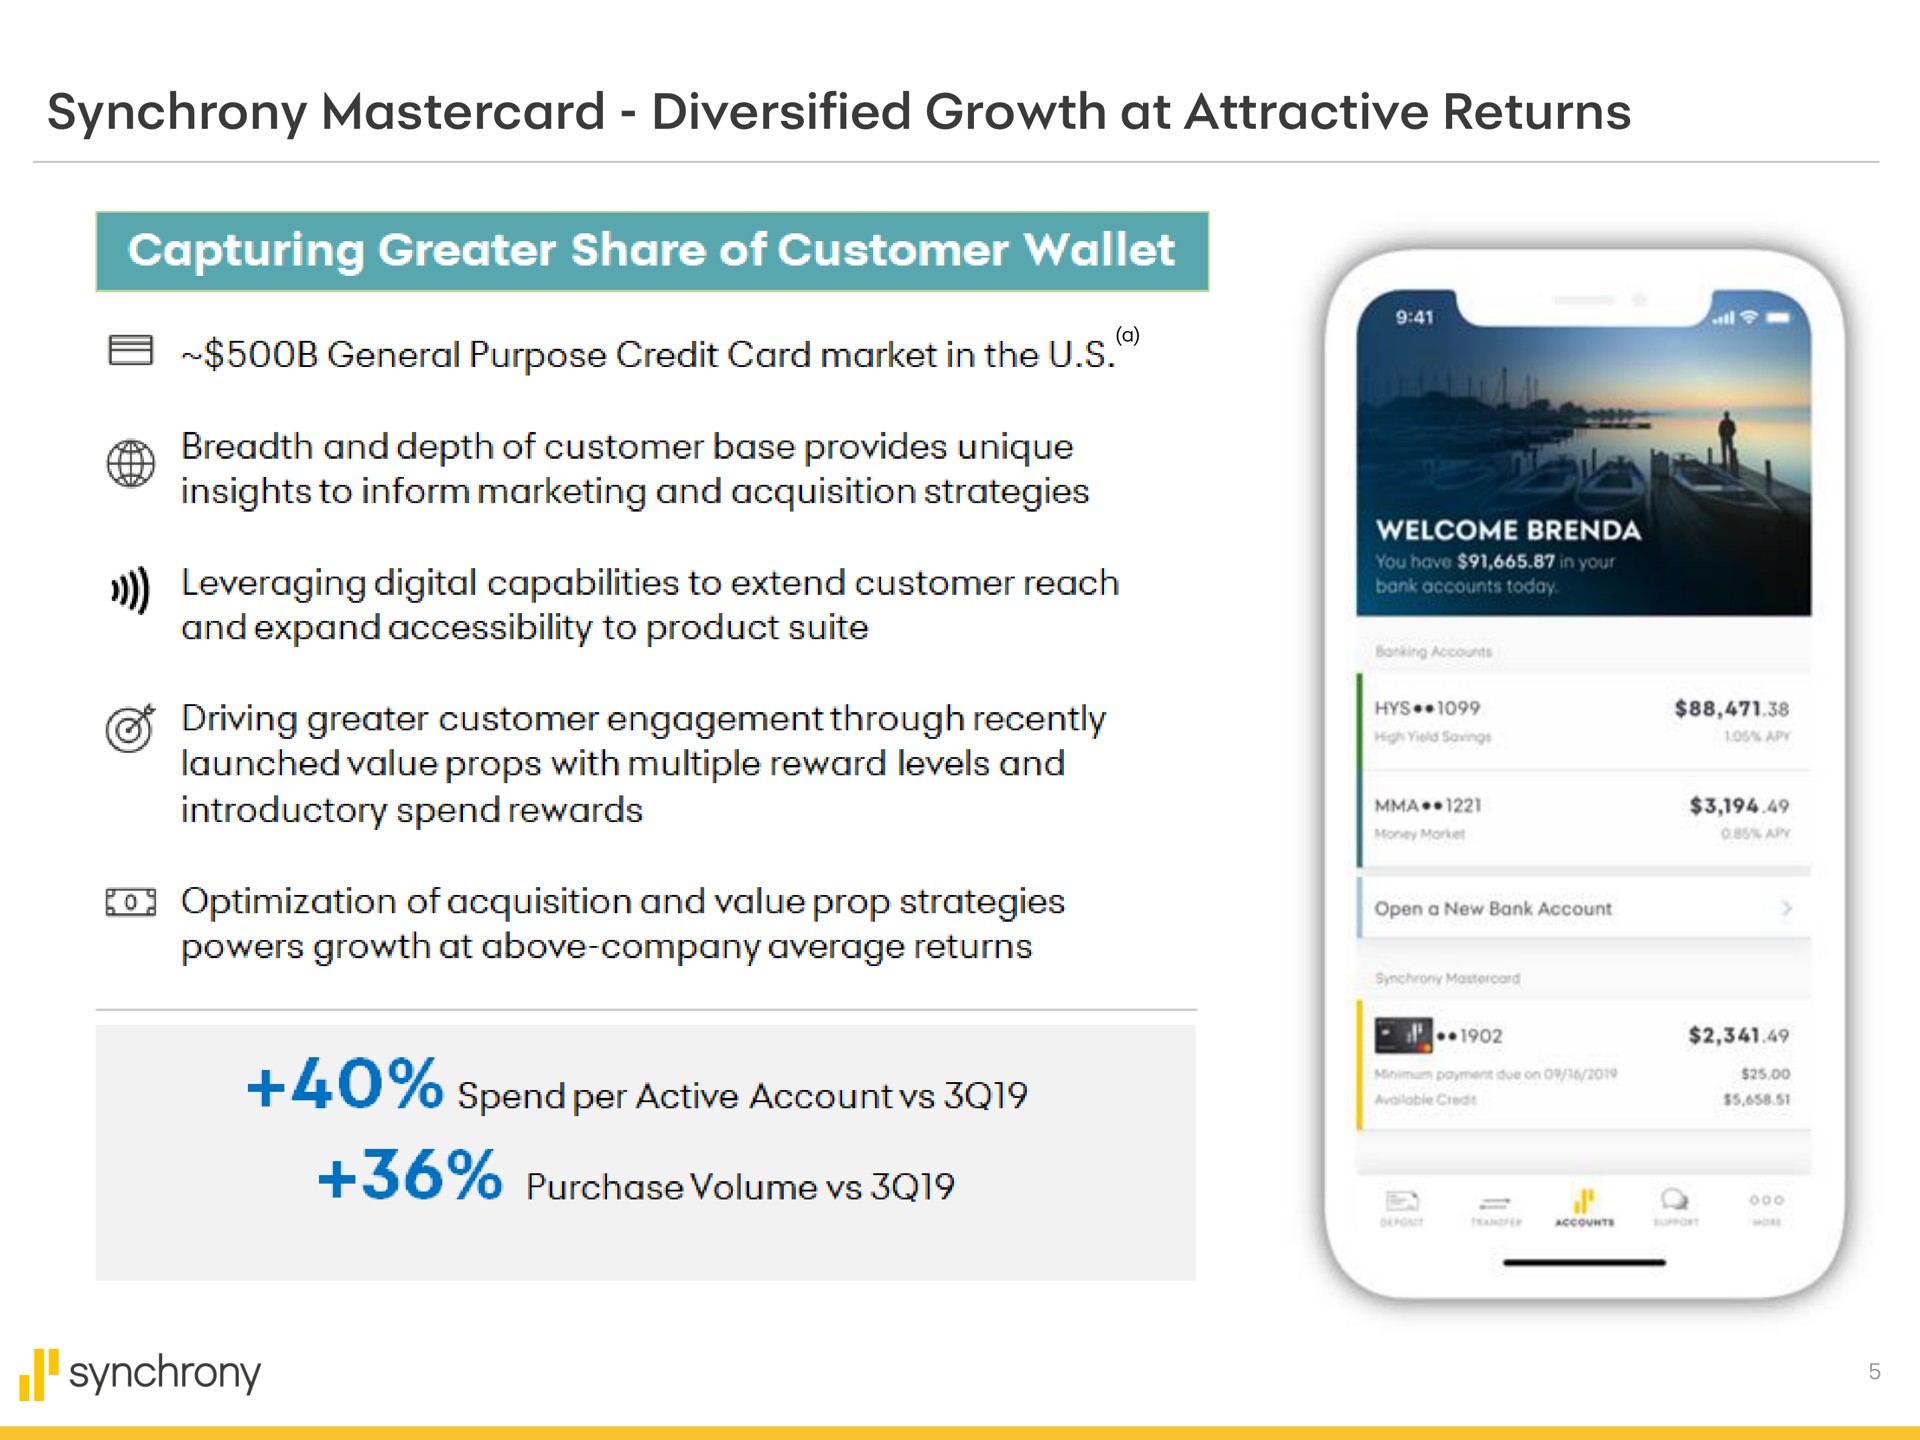 synchrony diversified growth at attractive returns capturing greater share of customer wallet breadth and depth of customer base provides unique insights to inform marketing and acquisition strategies leveraging digital capabilities to extend customer reach and expand accessibility to product suite driving greater customer engagement through recently launched value props with multiple reward levels and introductory spend rewards optimization of acquisition and value prop strategies powers above company average spend per active account open a new bank account | Synchrony Financial